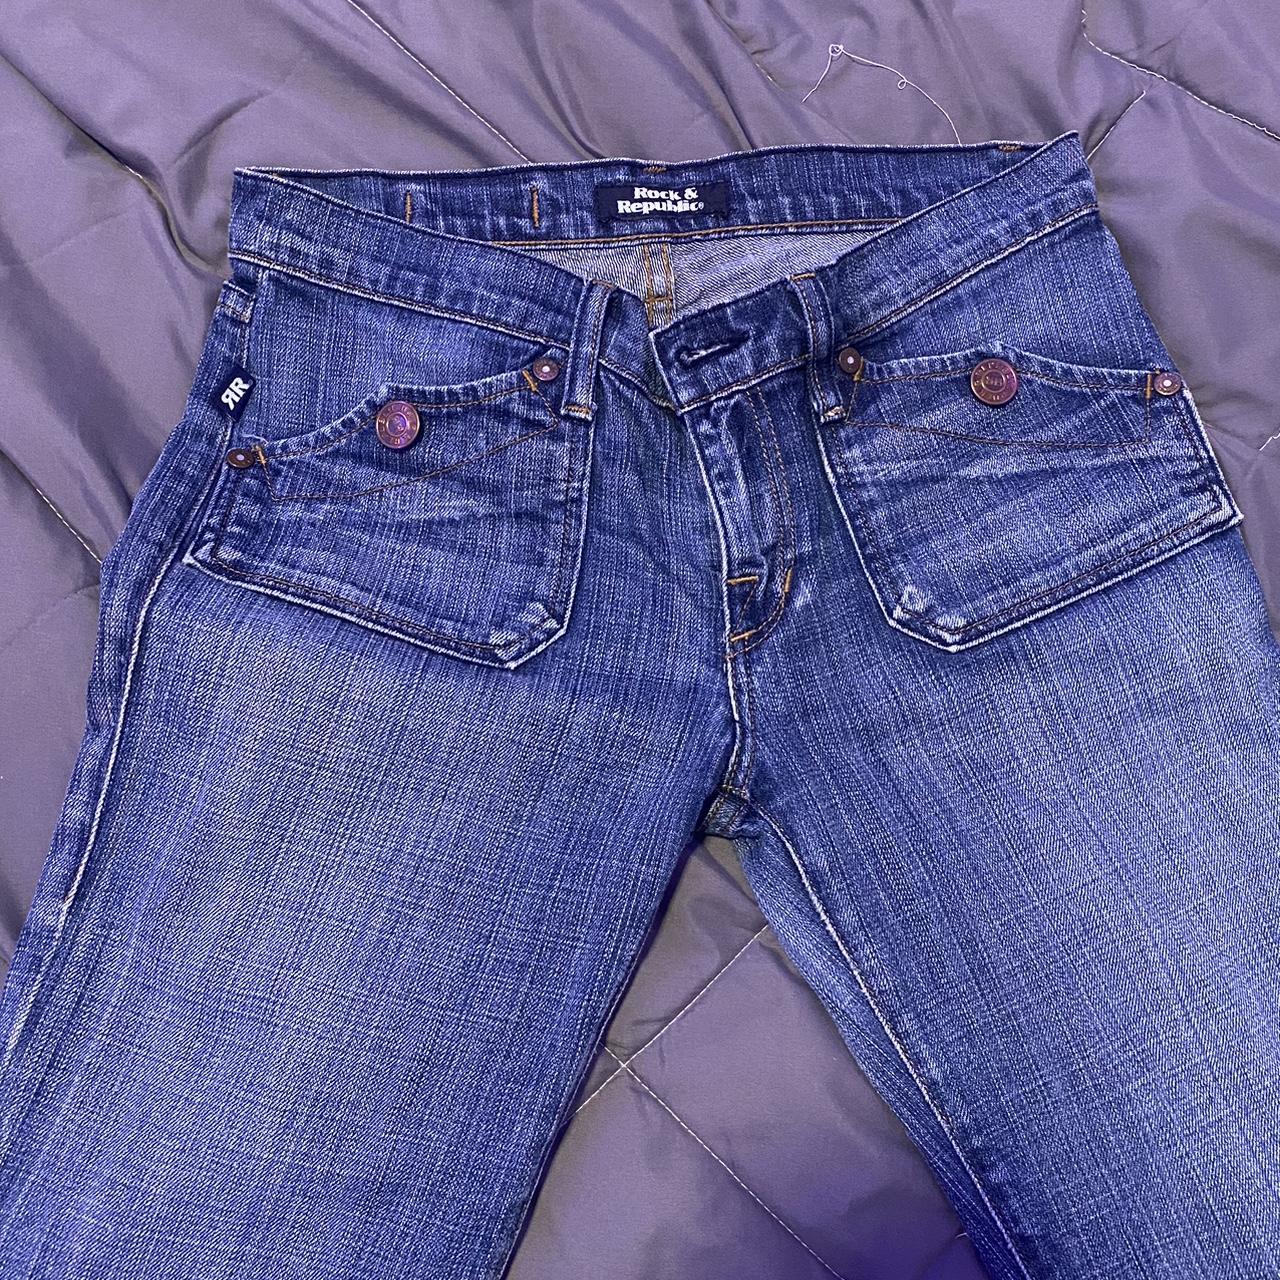 Low rise flare jeans (thrifted but didn’t fit)... - Depop